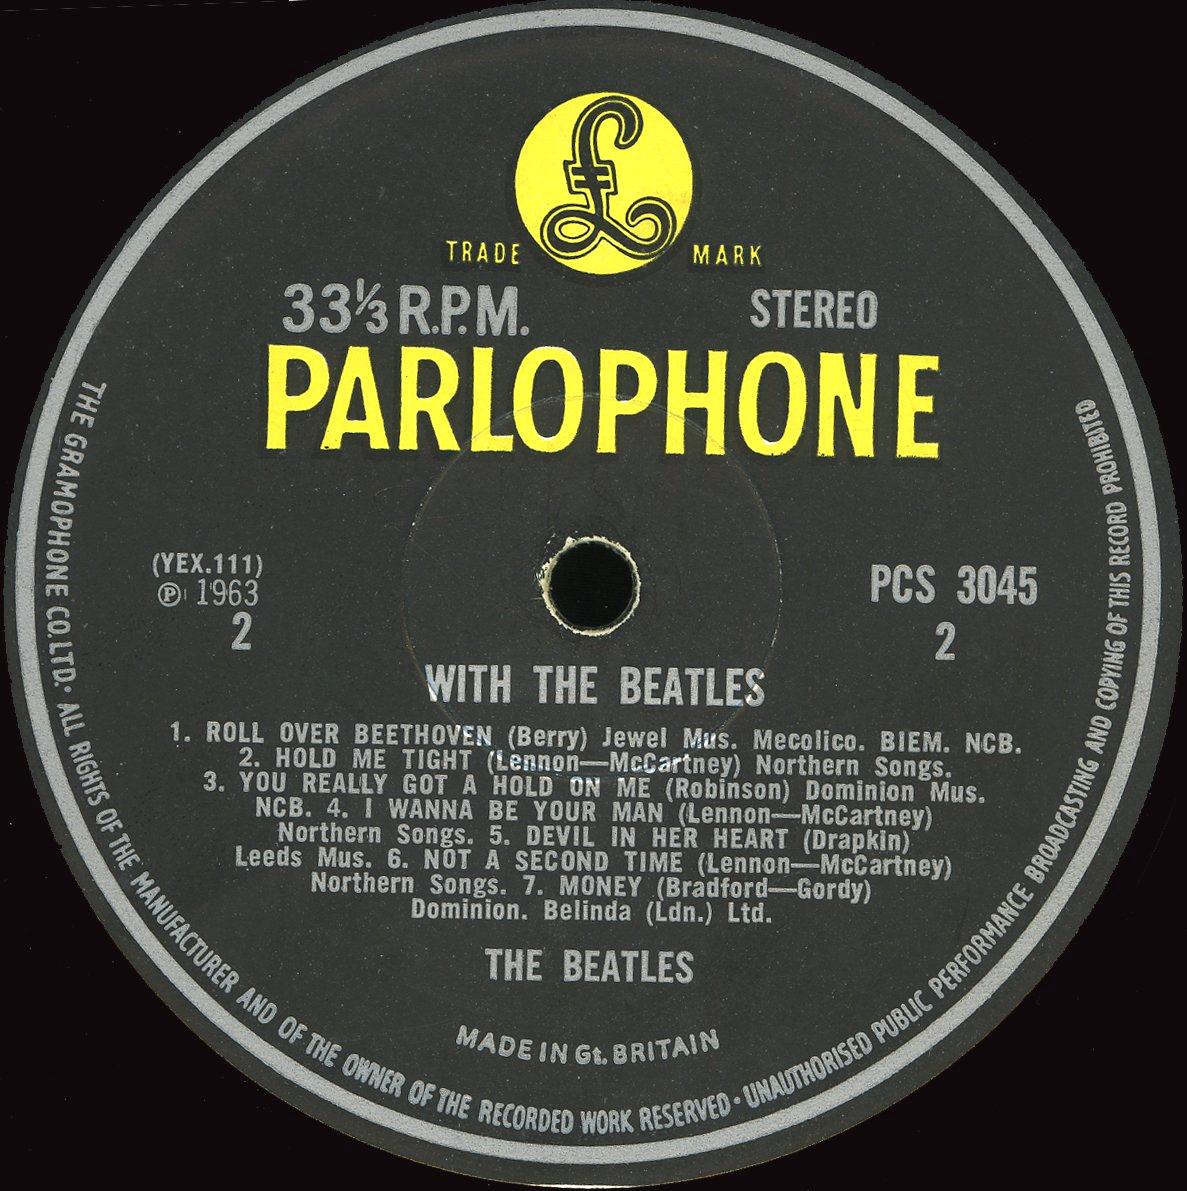 The Beatles Collection » With The Beatles, Parlophone, PCS 3045.